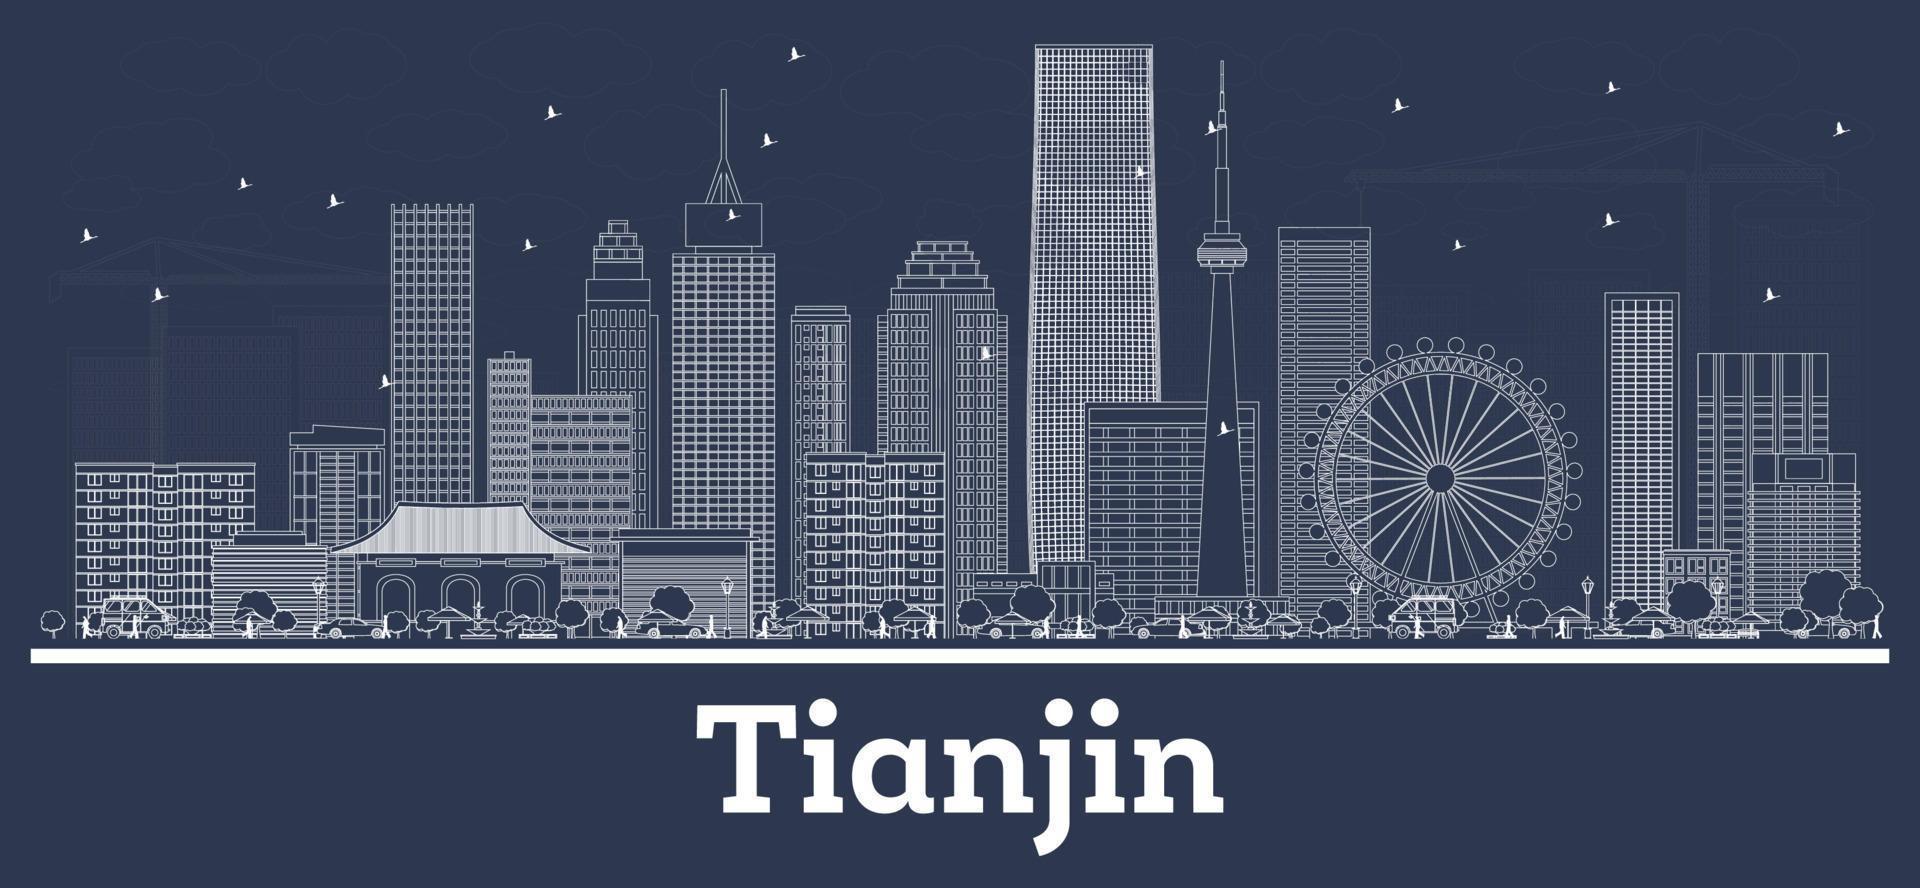 Outline Tianjin China City Skyline with White Buildings. vector